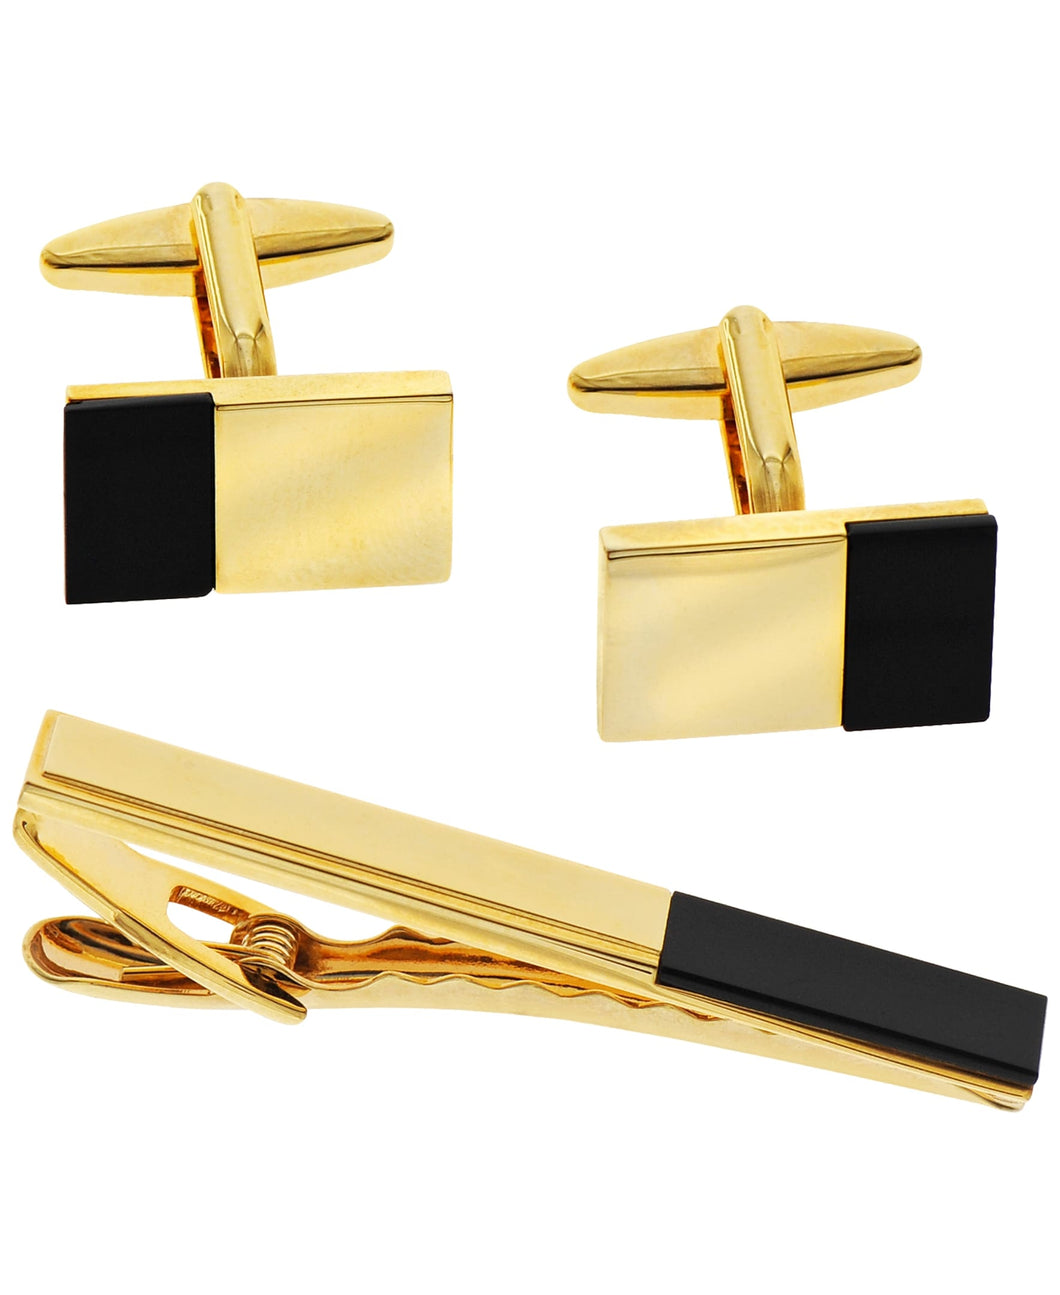 Sutton Gold-Tone Stainless Steel and Black Cufflinks and Tie Clip Set